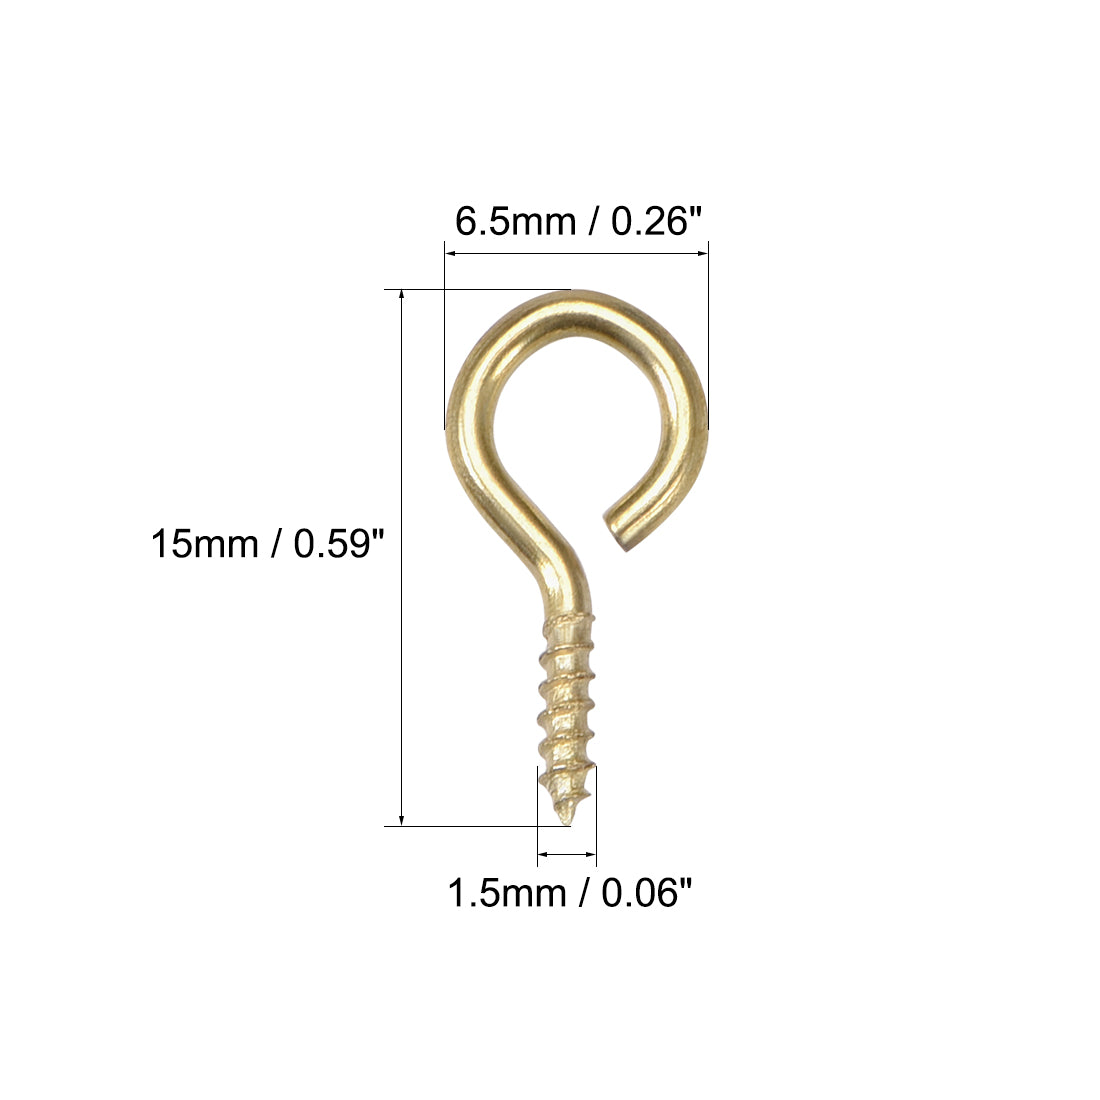 uxcell Uxcell 0.59" Small Screw Eye Hooks Self Tapping Screws Carbon Steel Screw-in Hanger Eye-Shape Ring Hooks Gold 100pcs